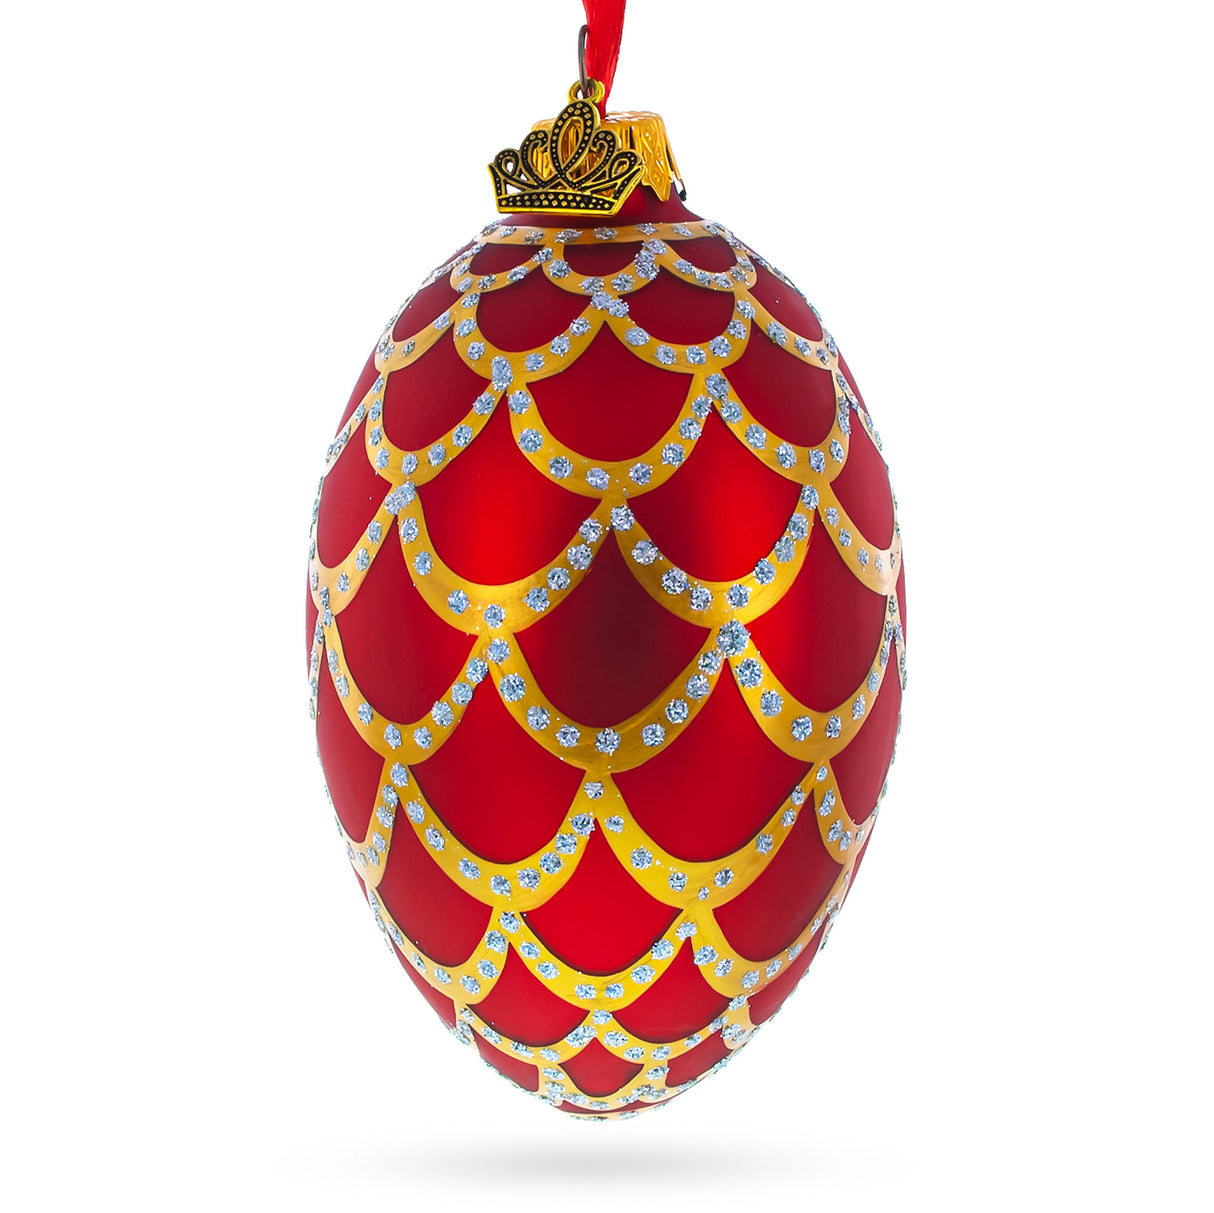 Glass 1900 Pine Cone In Red Royal Egg Glass Ornament 4 Inches in Red color Oval